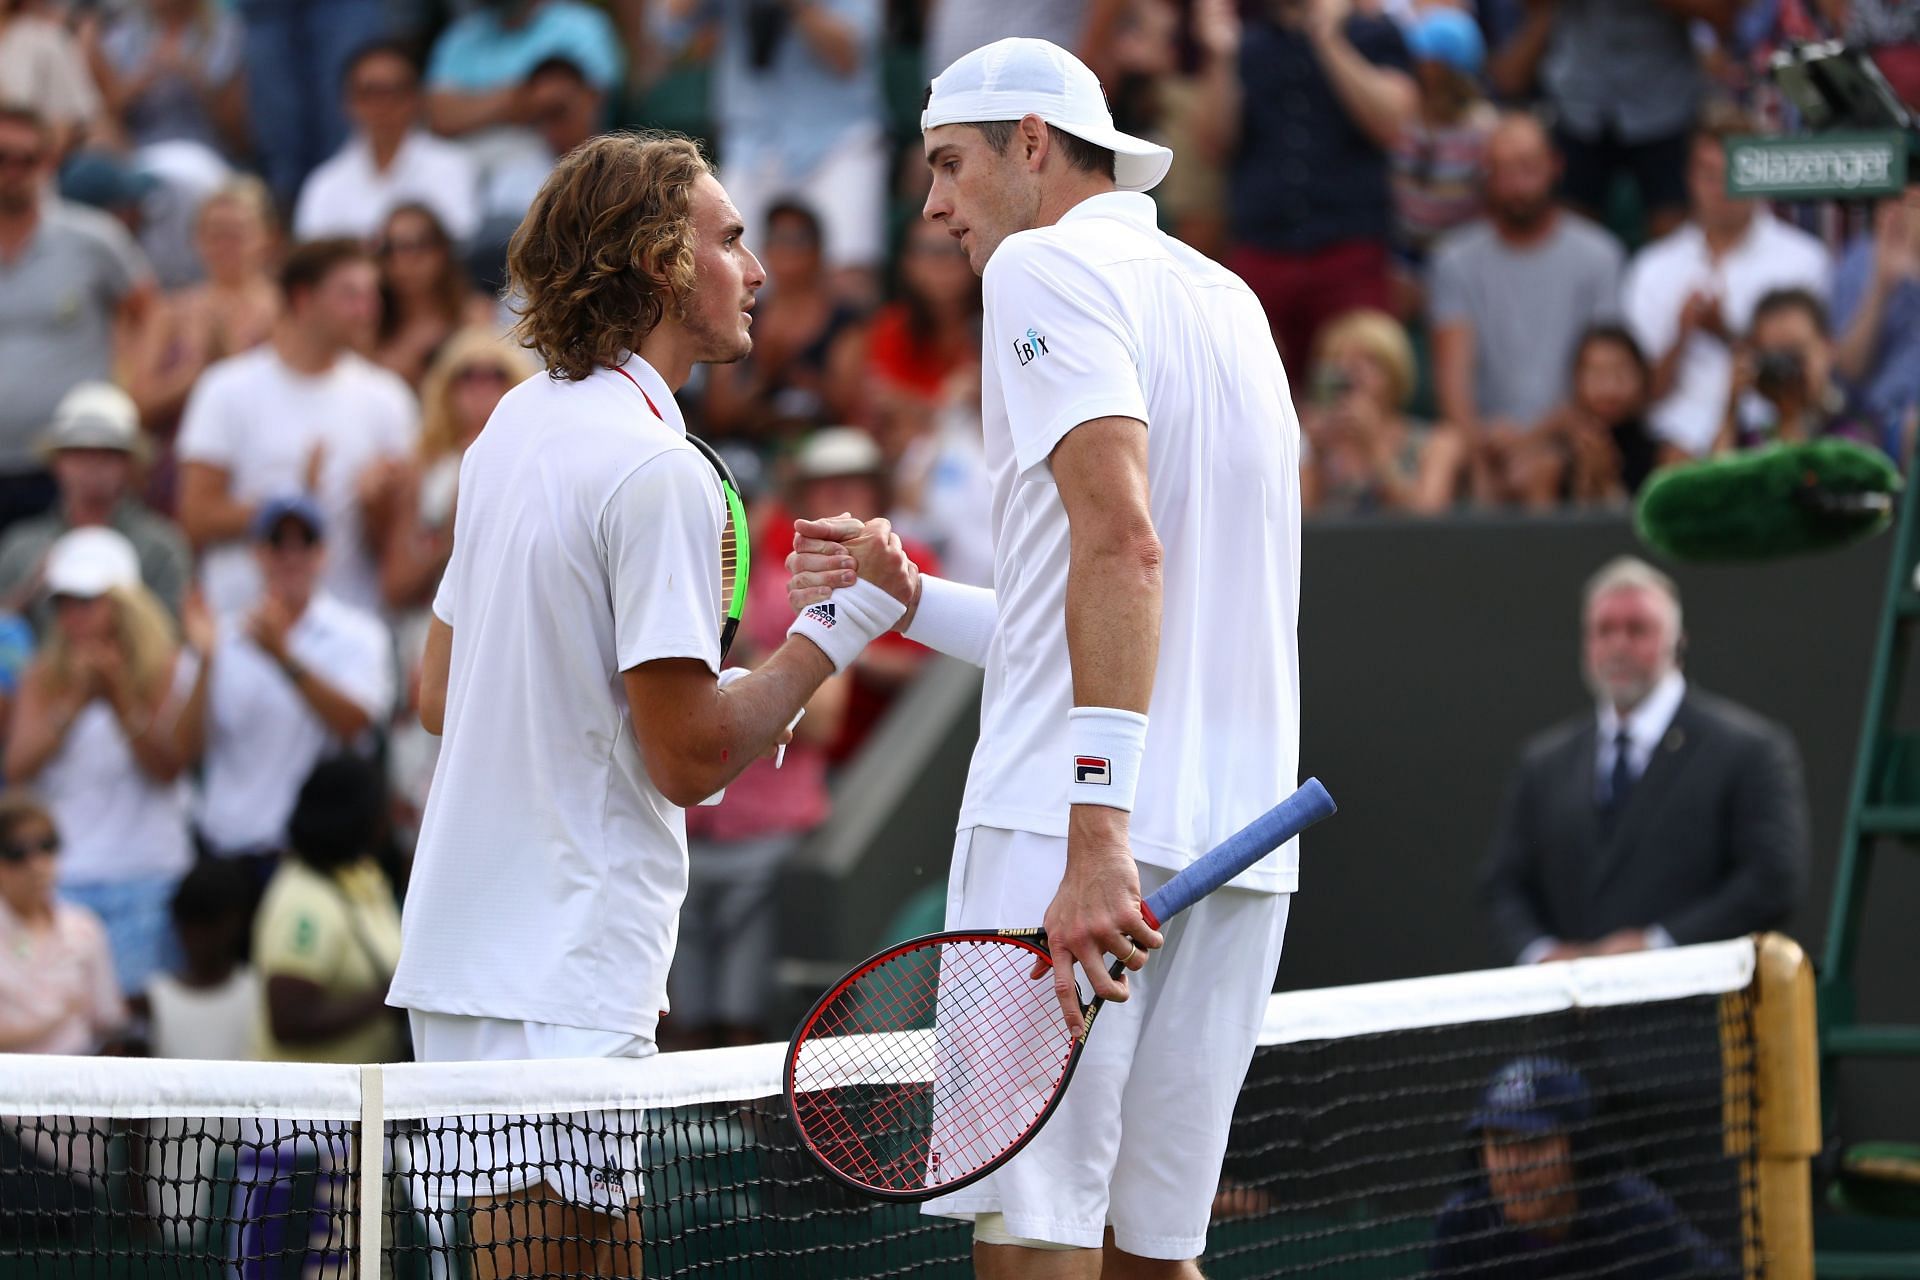 Tsitsipas has won the previous four encounters between the duo